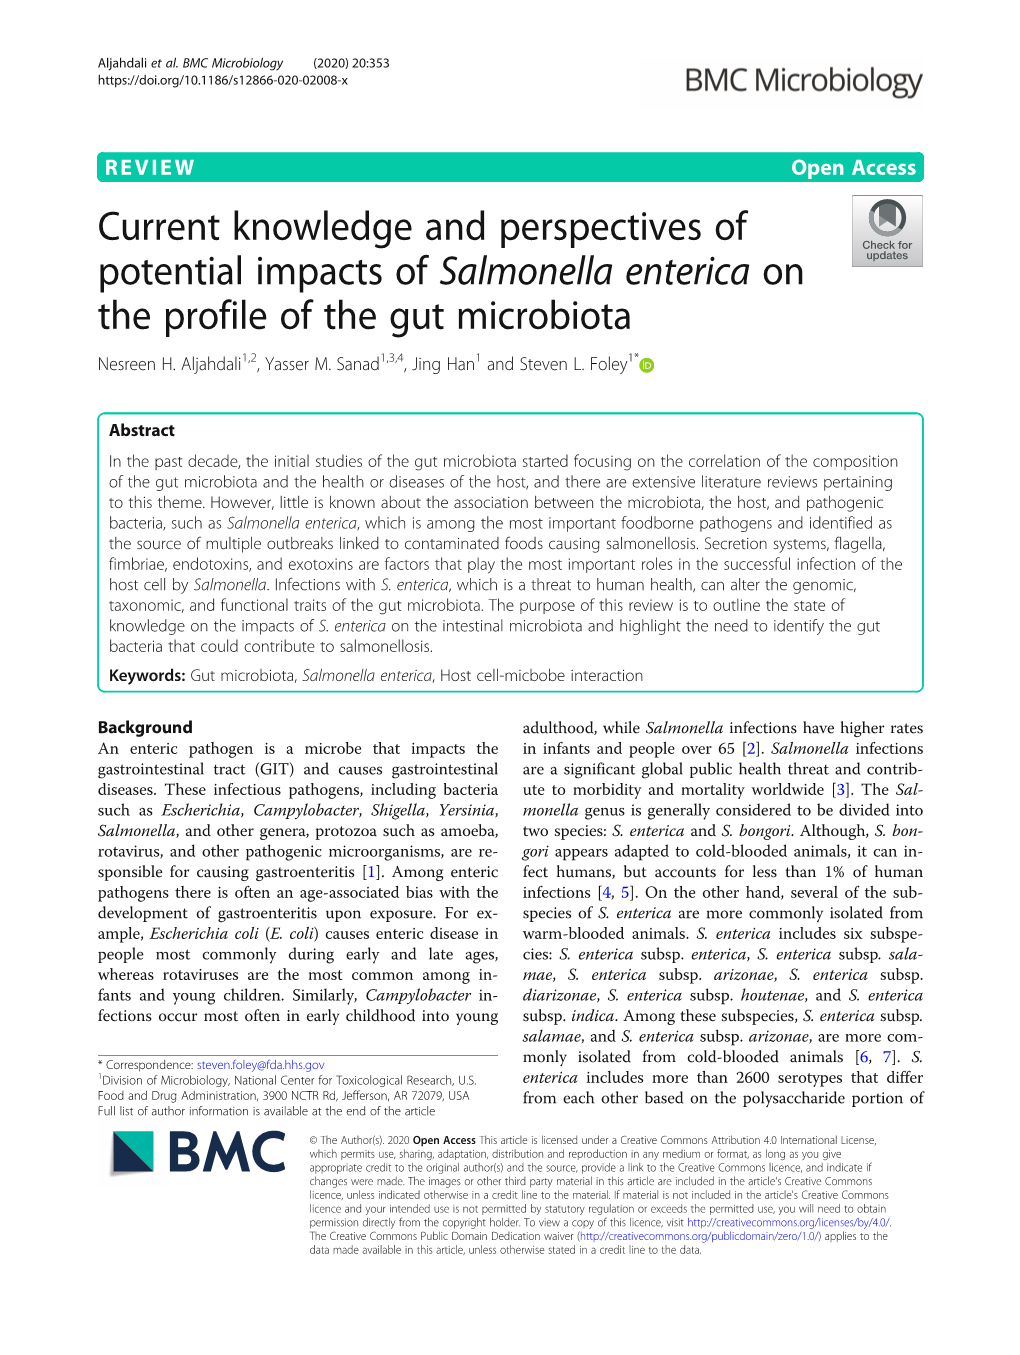 Current Knowledge and Perspectives of Potential Impacts of Salmonella Enterica on the Profile of the Gut Microbiota Nesreen H